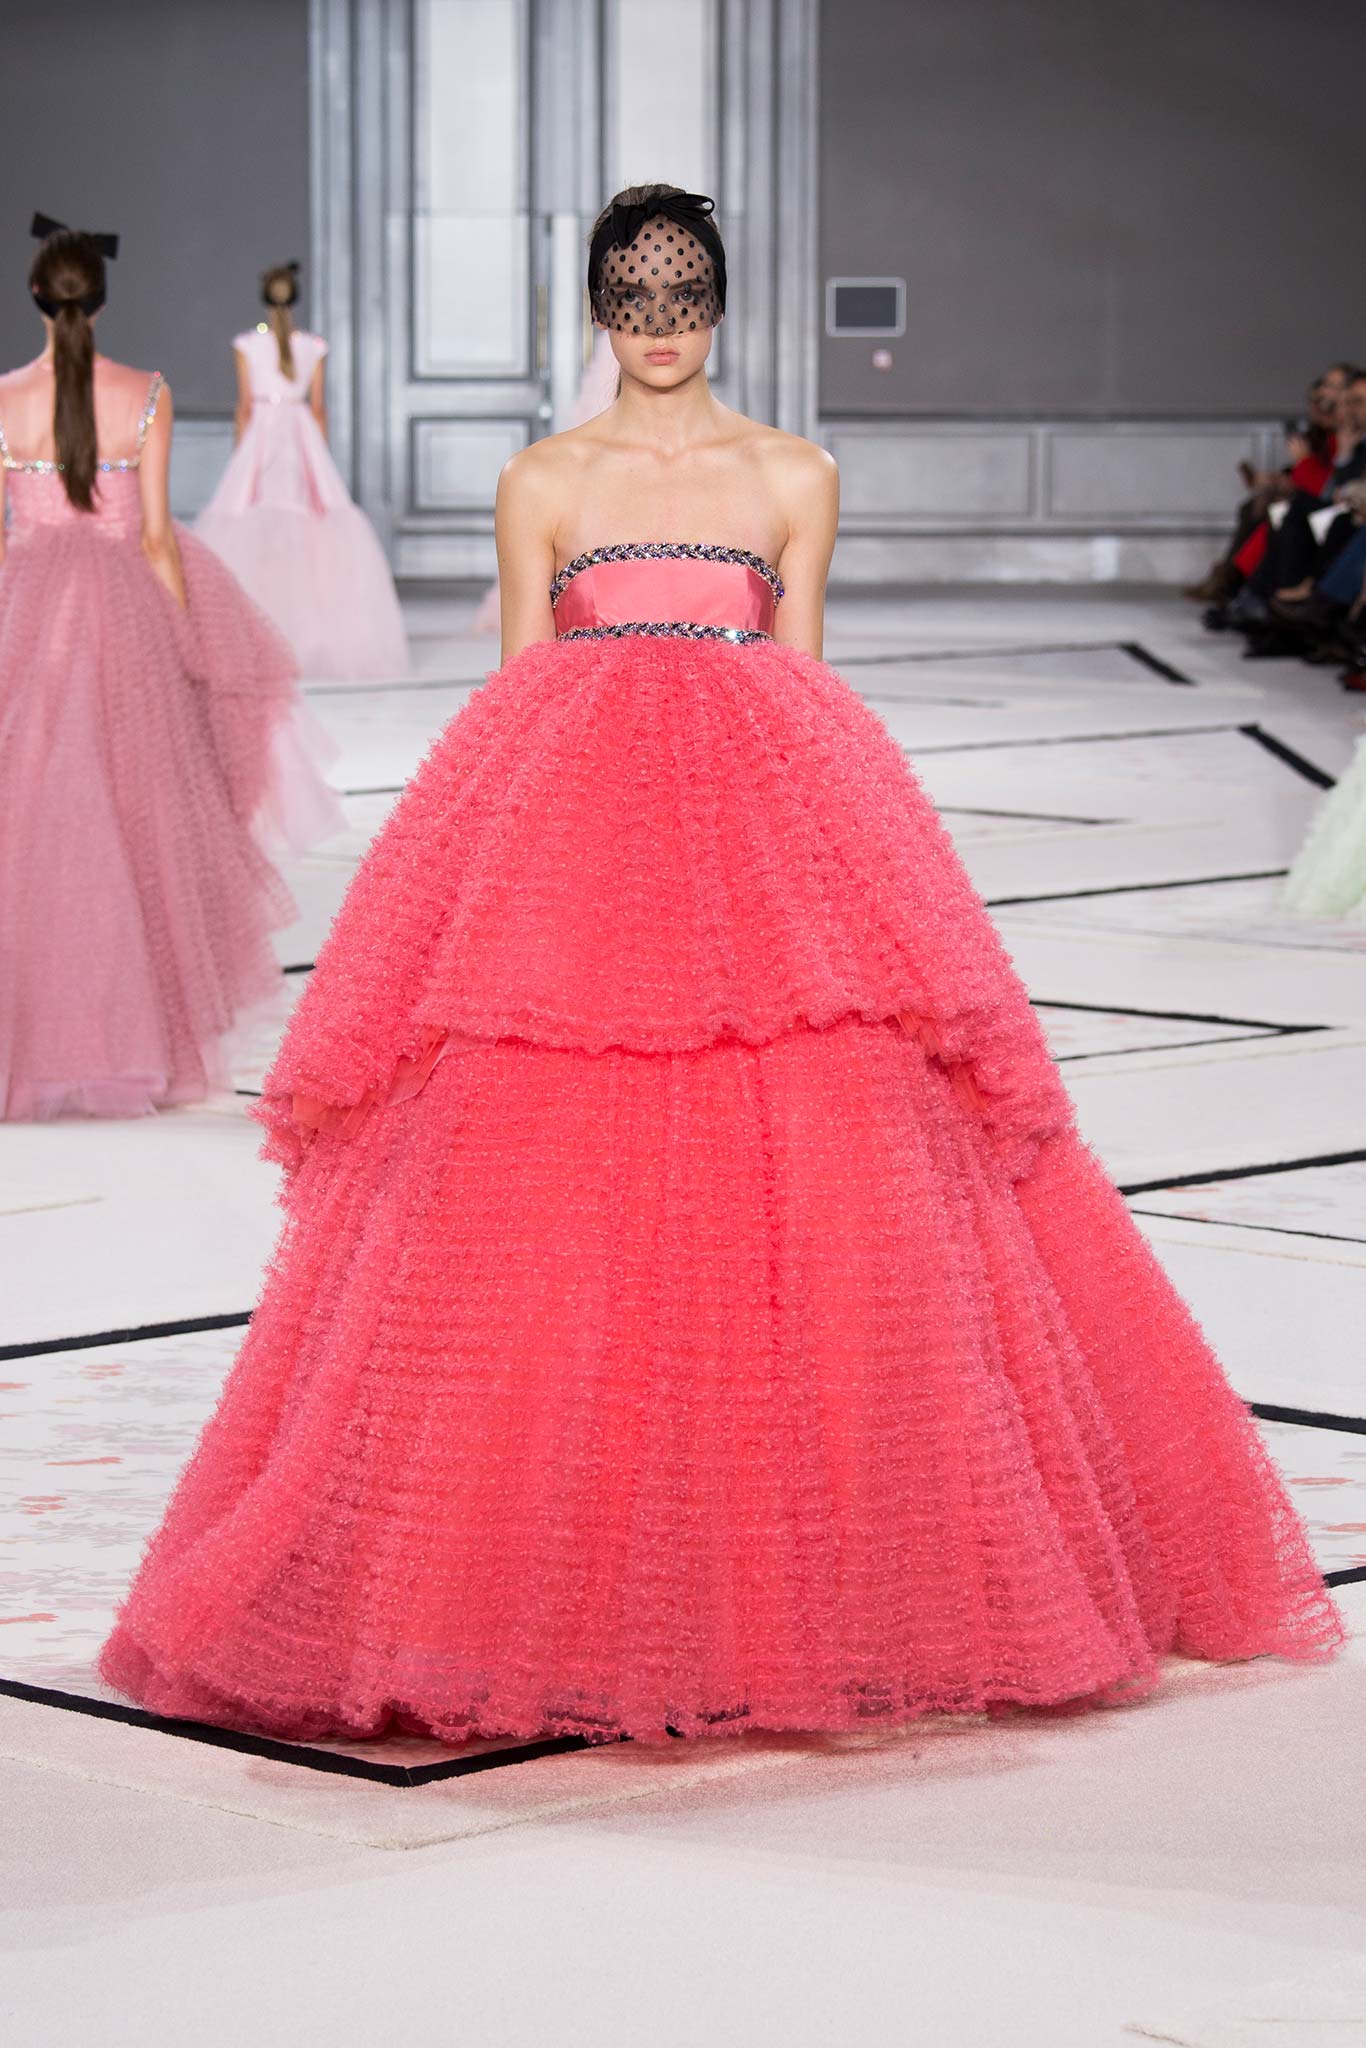 Project Fairytale: Top 10 Looks from the Spring 2015 Couture Shows